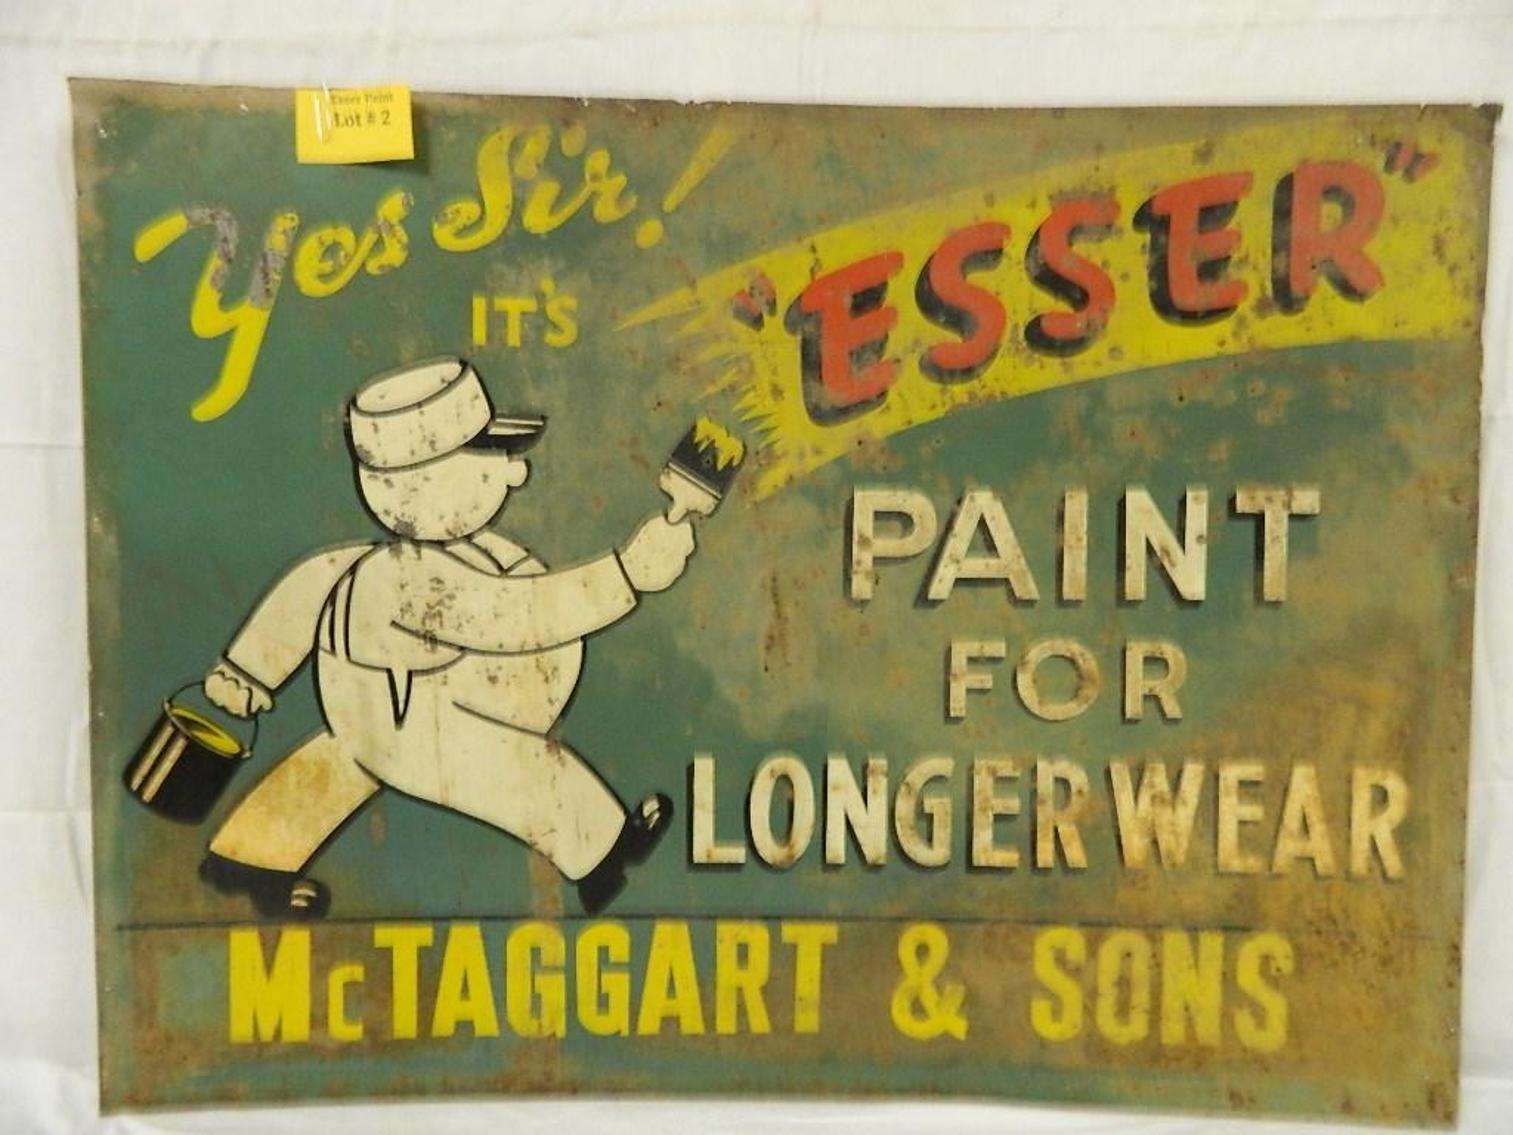 Collectible Signs and Cans